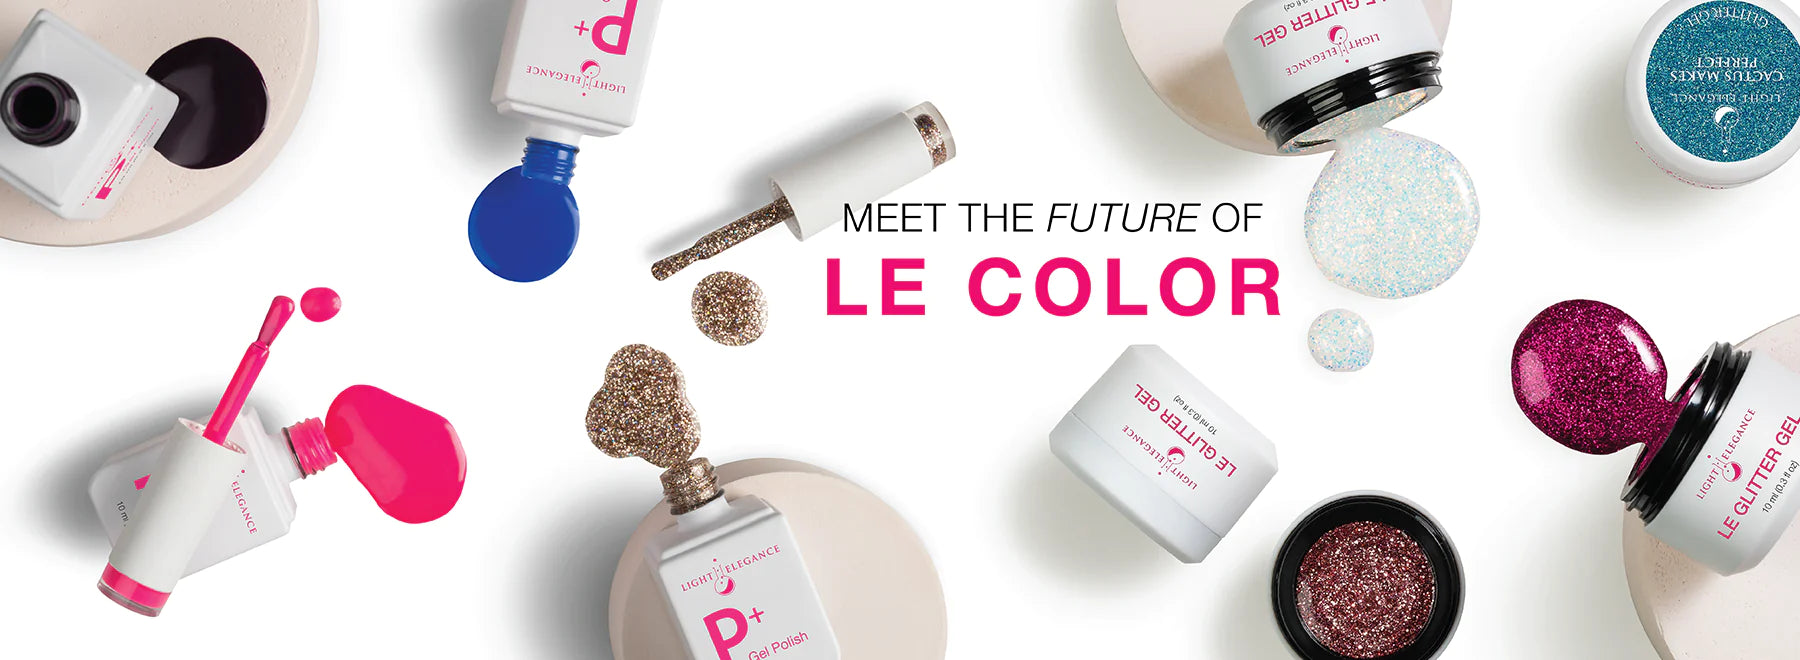 THE FUTURE OF LE COLOR | Huge announcement from Light Elegance